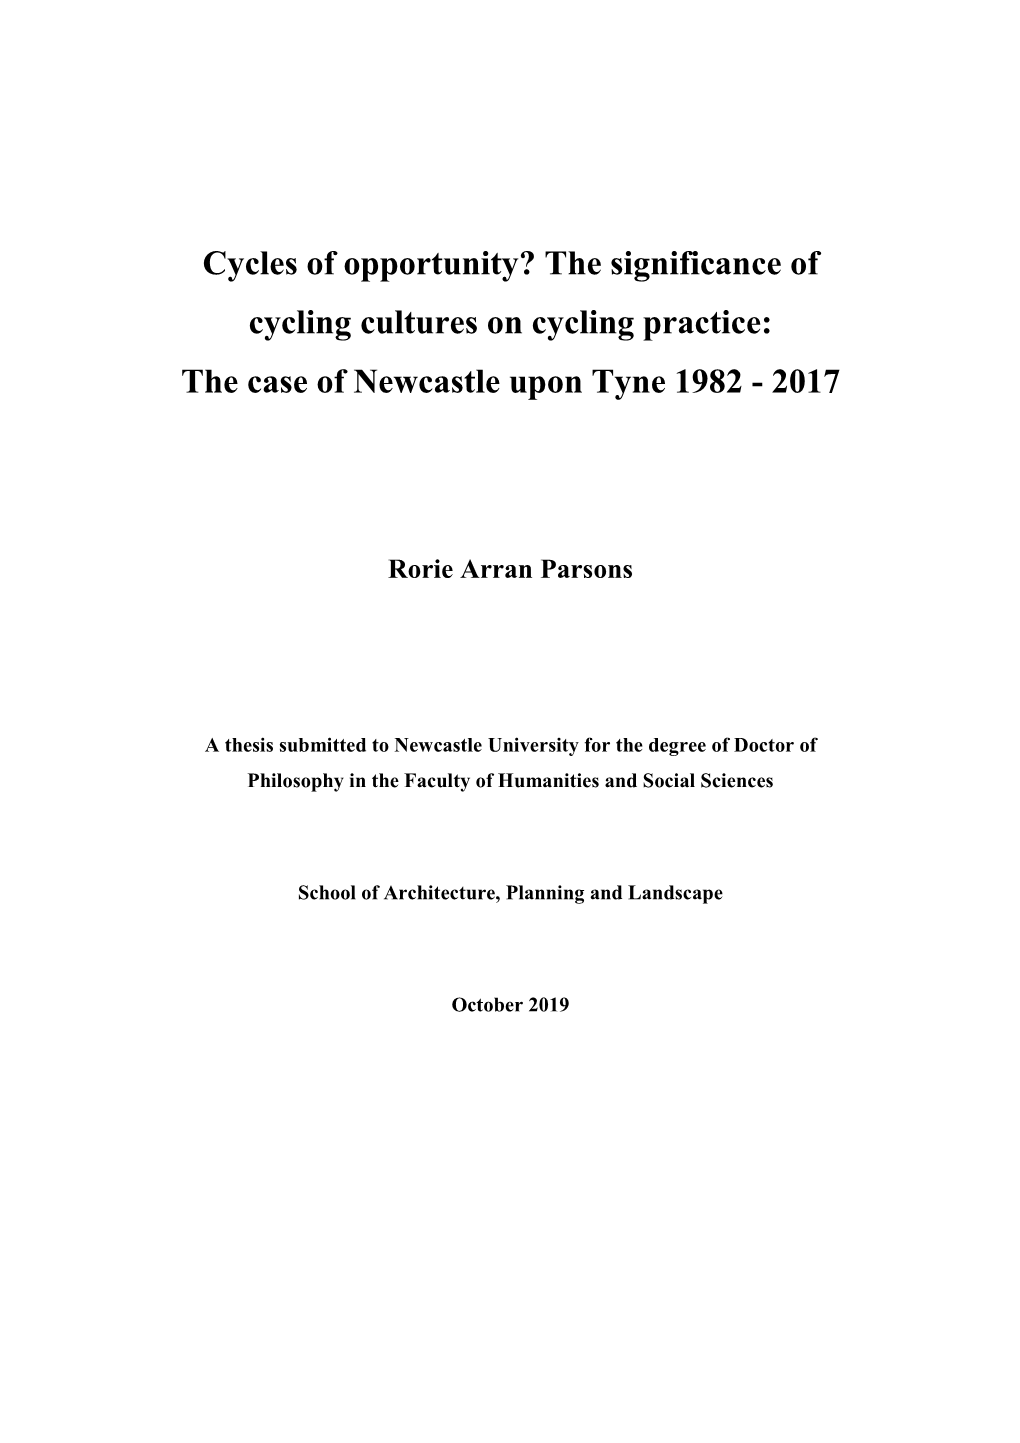 The Significance of Cycling Cultures on Cycling Practice: the Case of Newcastle Upon Tyne 1982 - 2017